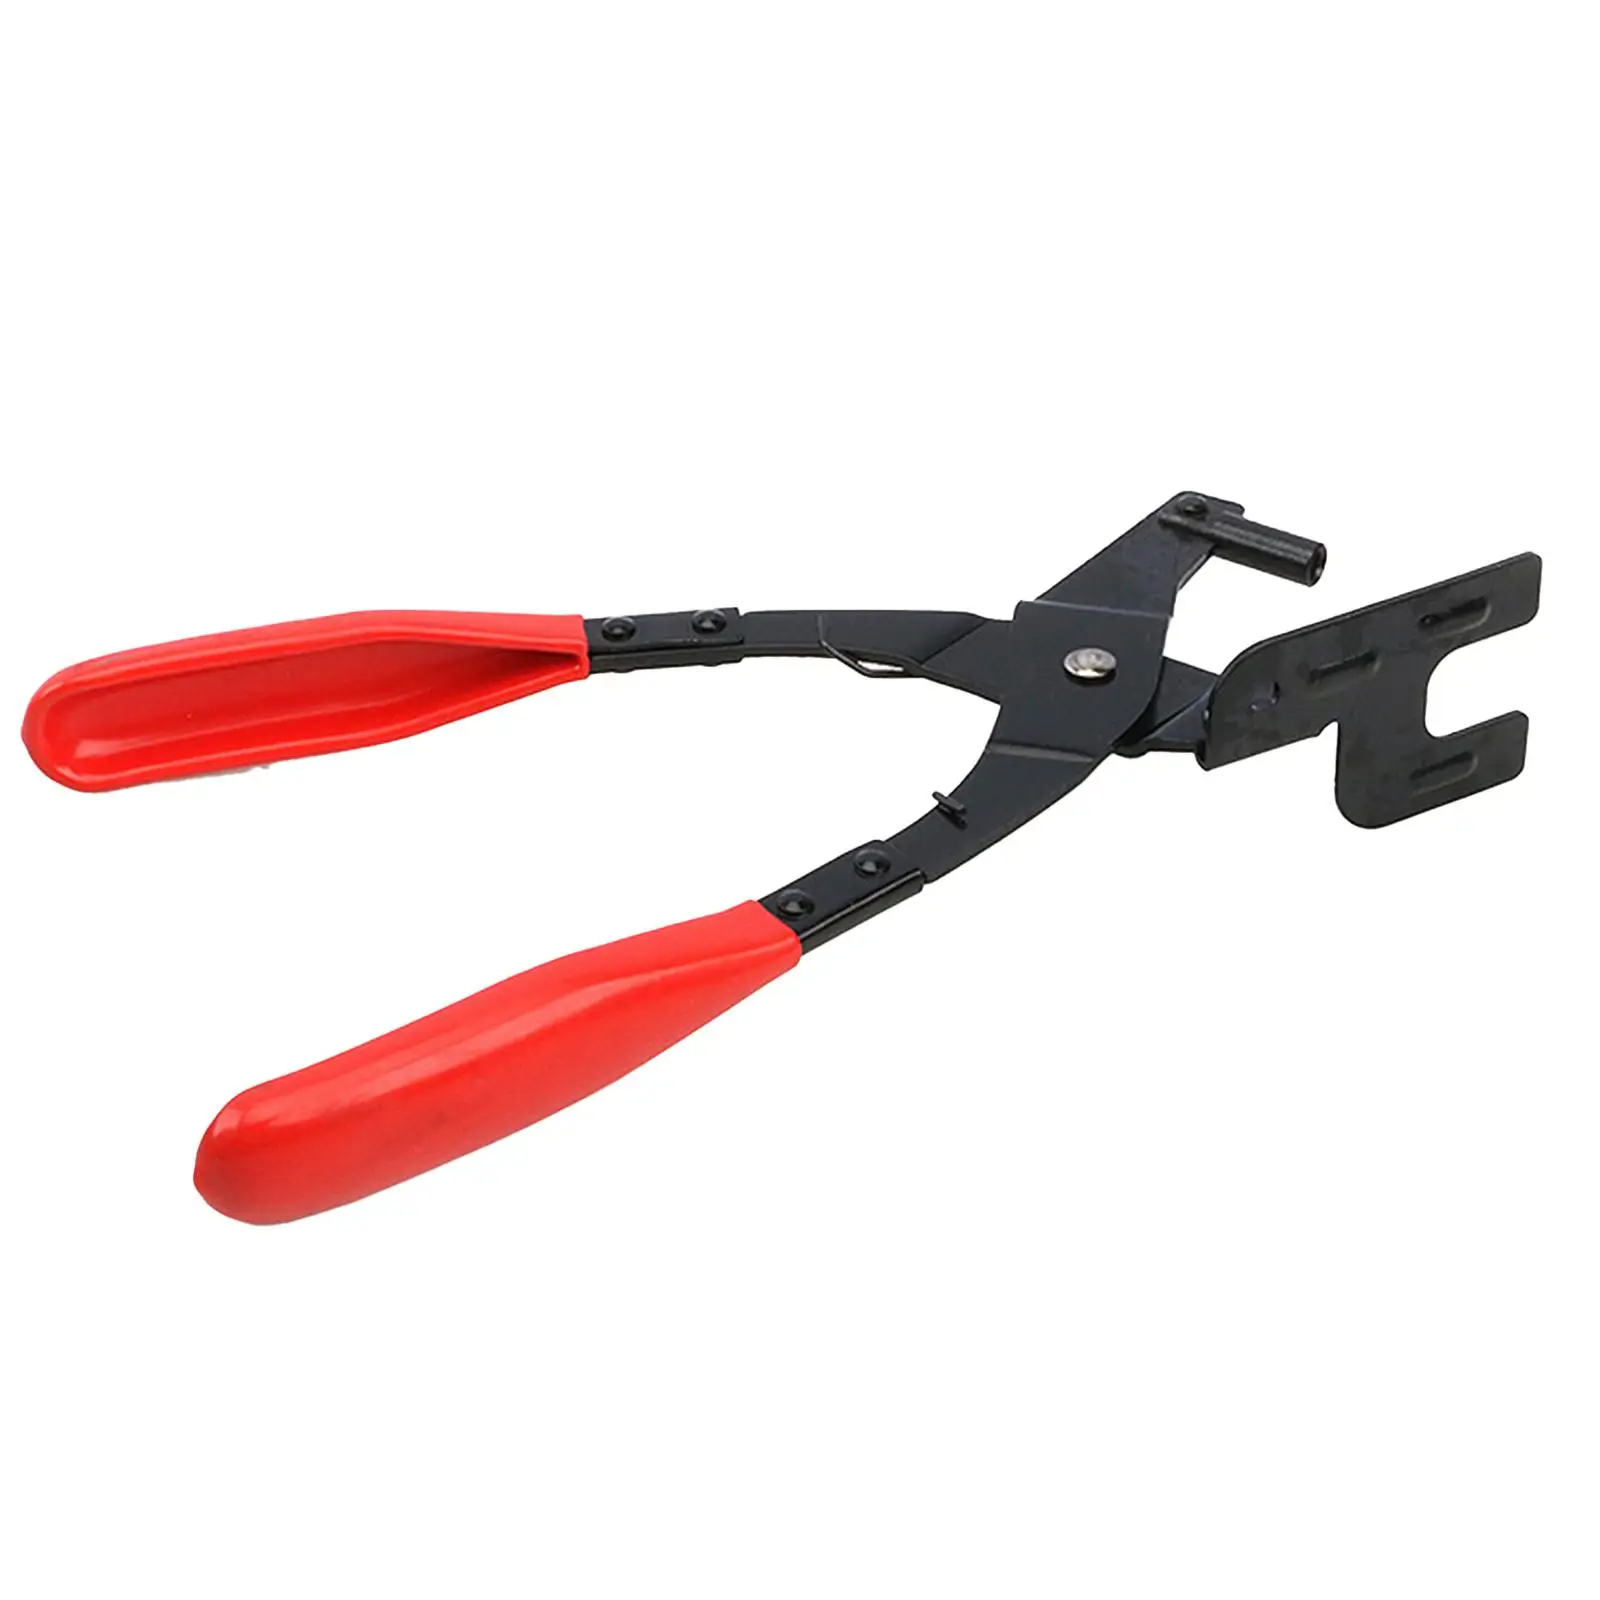 Car Exhaust Hanger Removal Pliers Exhaust Grommet Pulling Pliers Rubber Grommet Removal Tool for Access in Hard to Reach Places